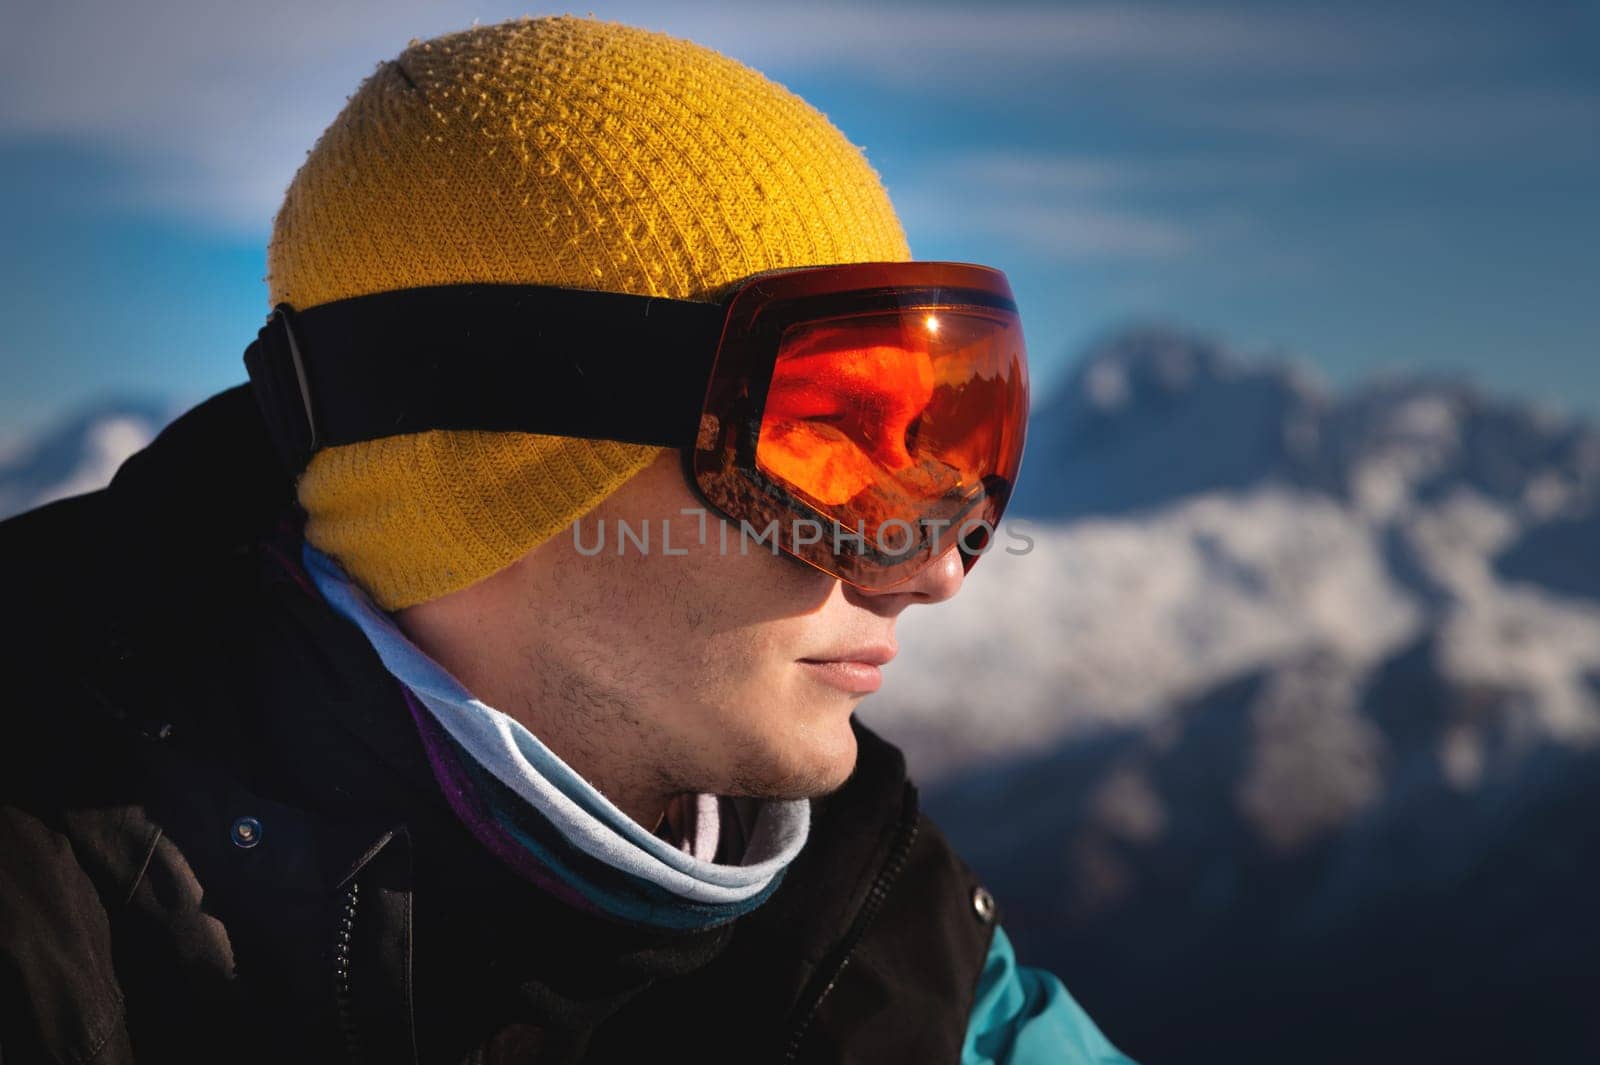 Male skier overlooking snow covered mountains on a sunny day, sun beams reflection in ski goggles.